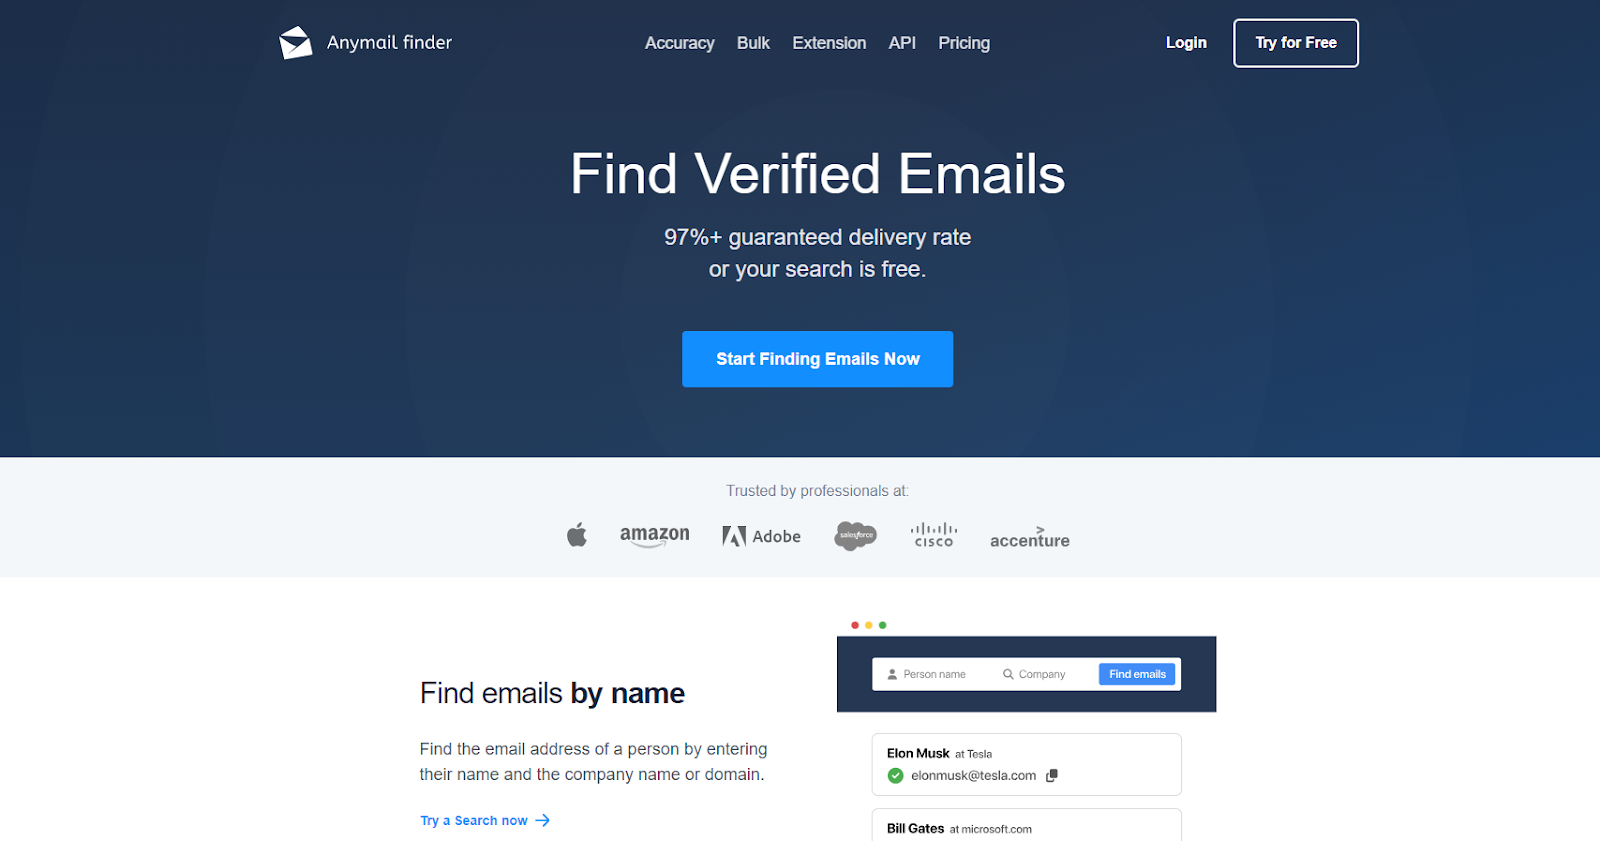 Best Reverse Email Lookup Tools: Anymail Finder